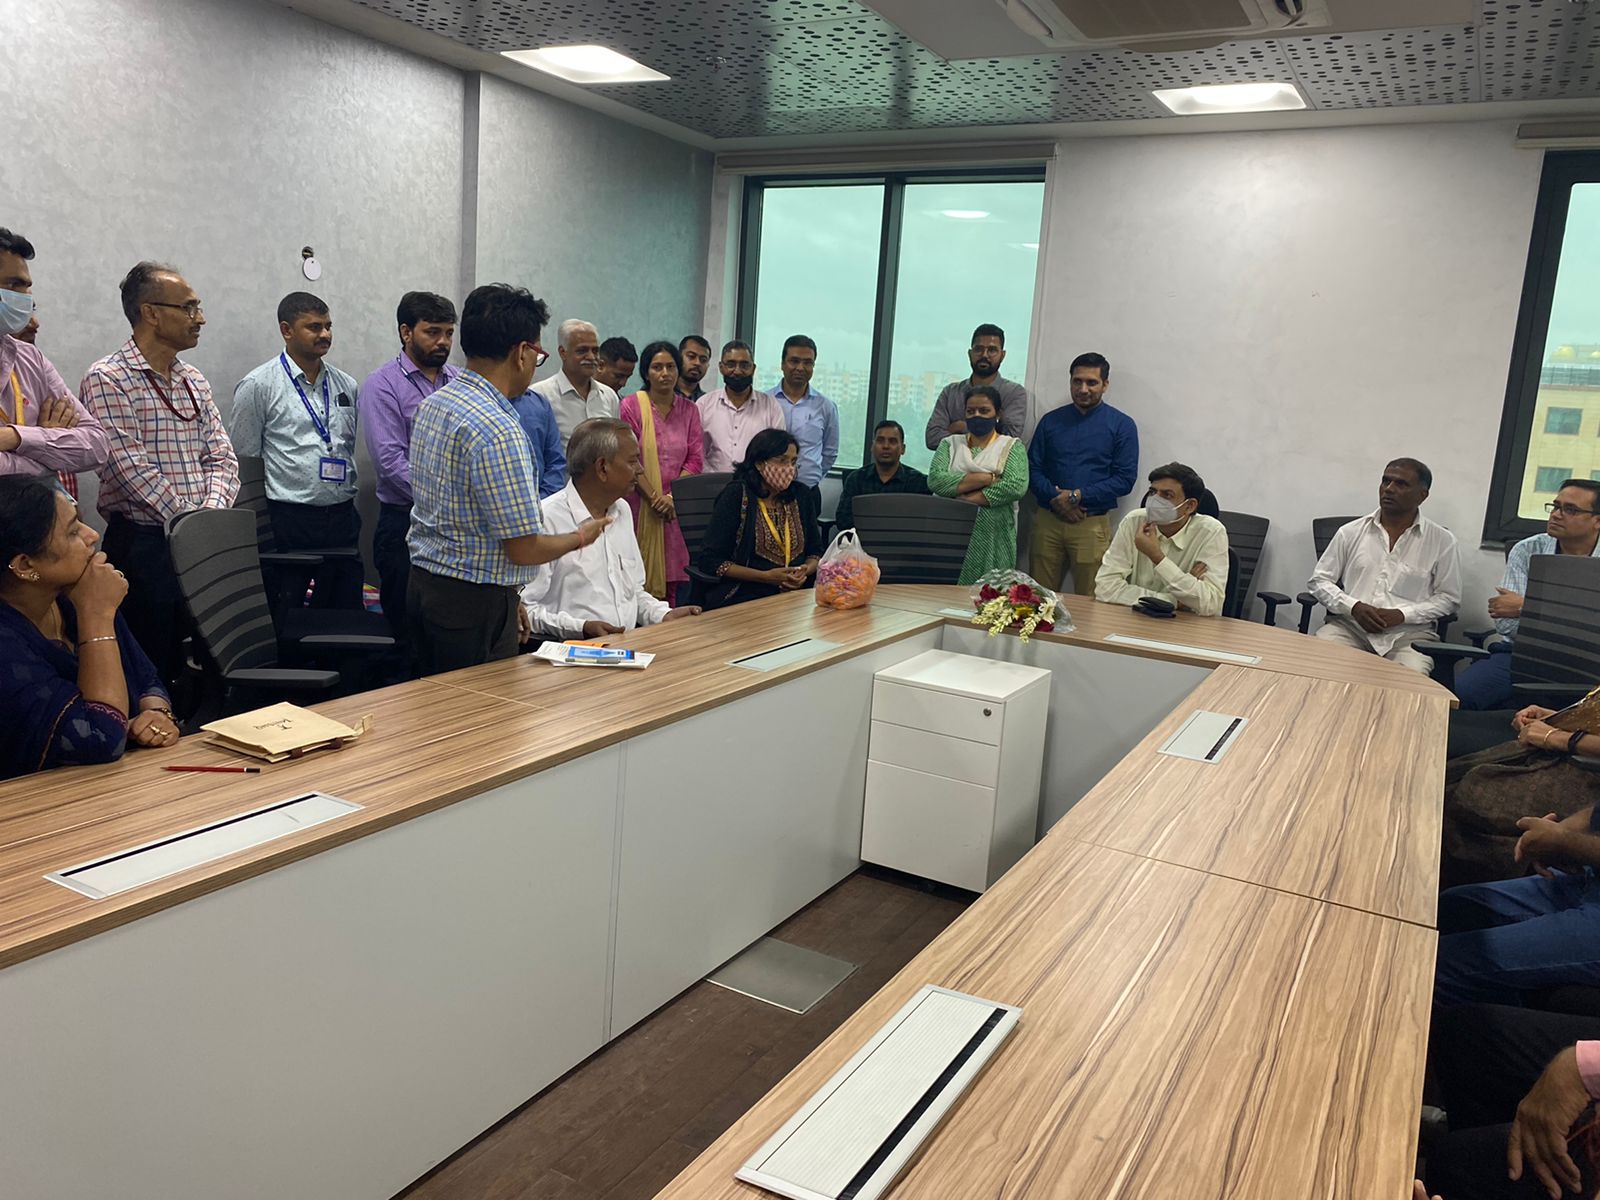 Farewell of Shri Lakhan Lal, Sup on supperannuation 31.07.2022